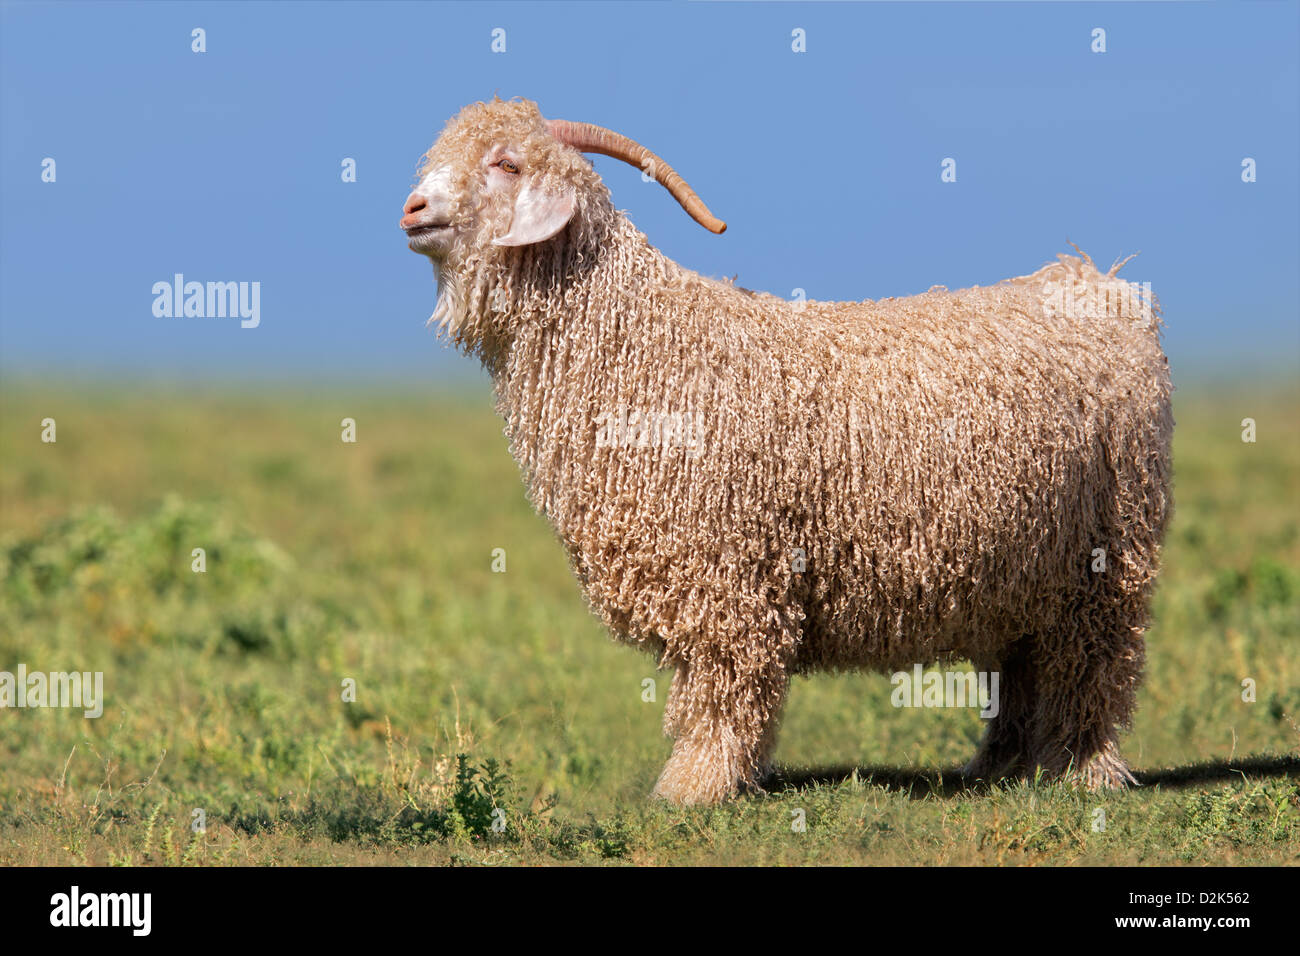 Angora goat standing in green pasture against a blue sky Stock Photo